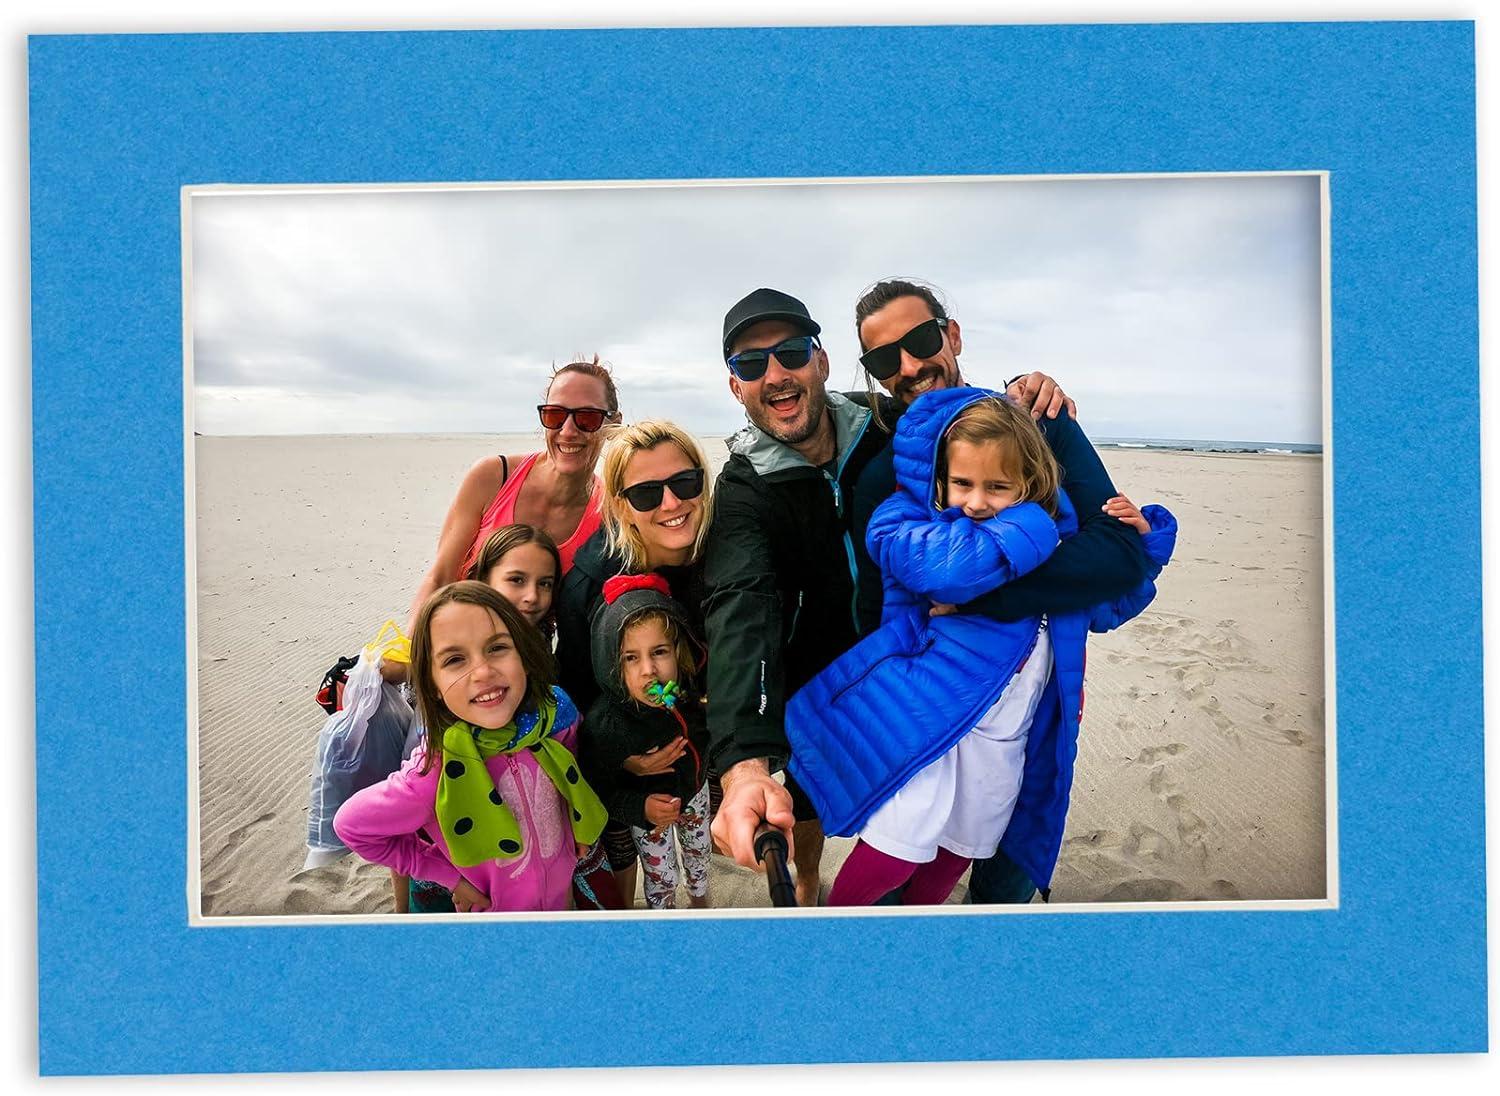 8x10 Mat for 11x14 Frame - Precut Mat Board Acid-Free Bay Blue 8x10 Photo  Matte Made to Fit a 11x14 Picture Frame Premium Matboard for Family Photos  Show Kits Art Picture Framing